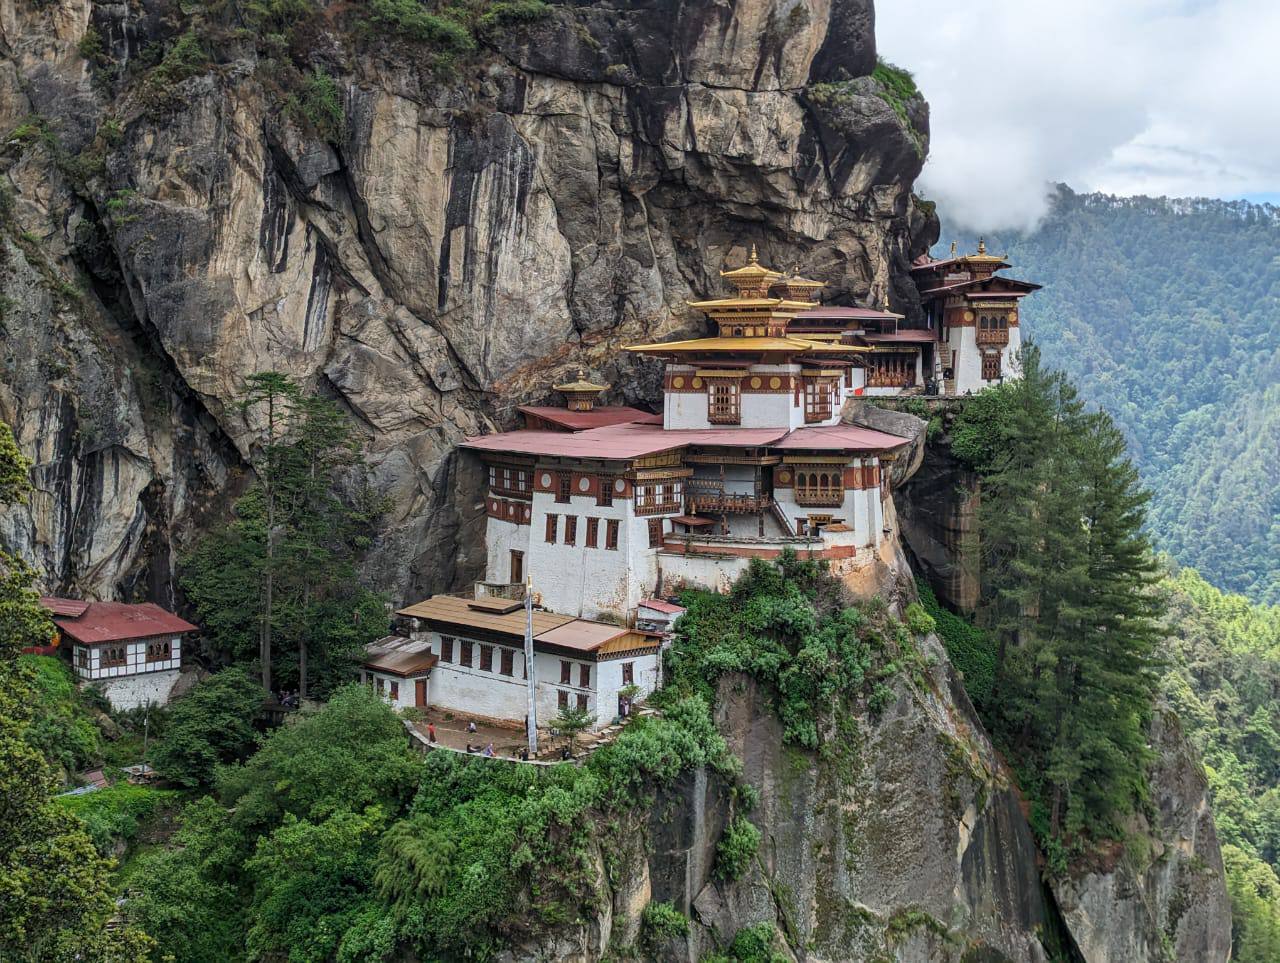 Human Rights in Bhutan – The Story You Do Not Hear